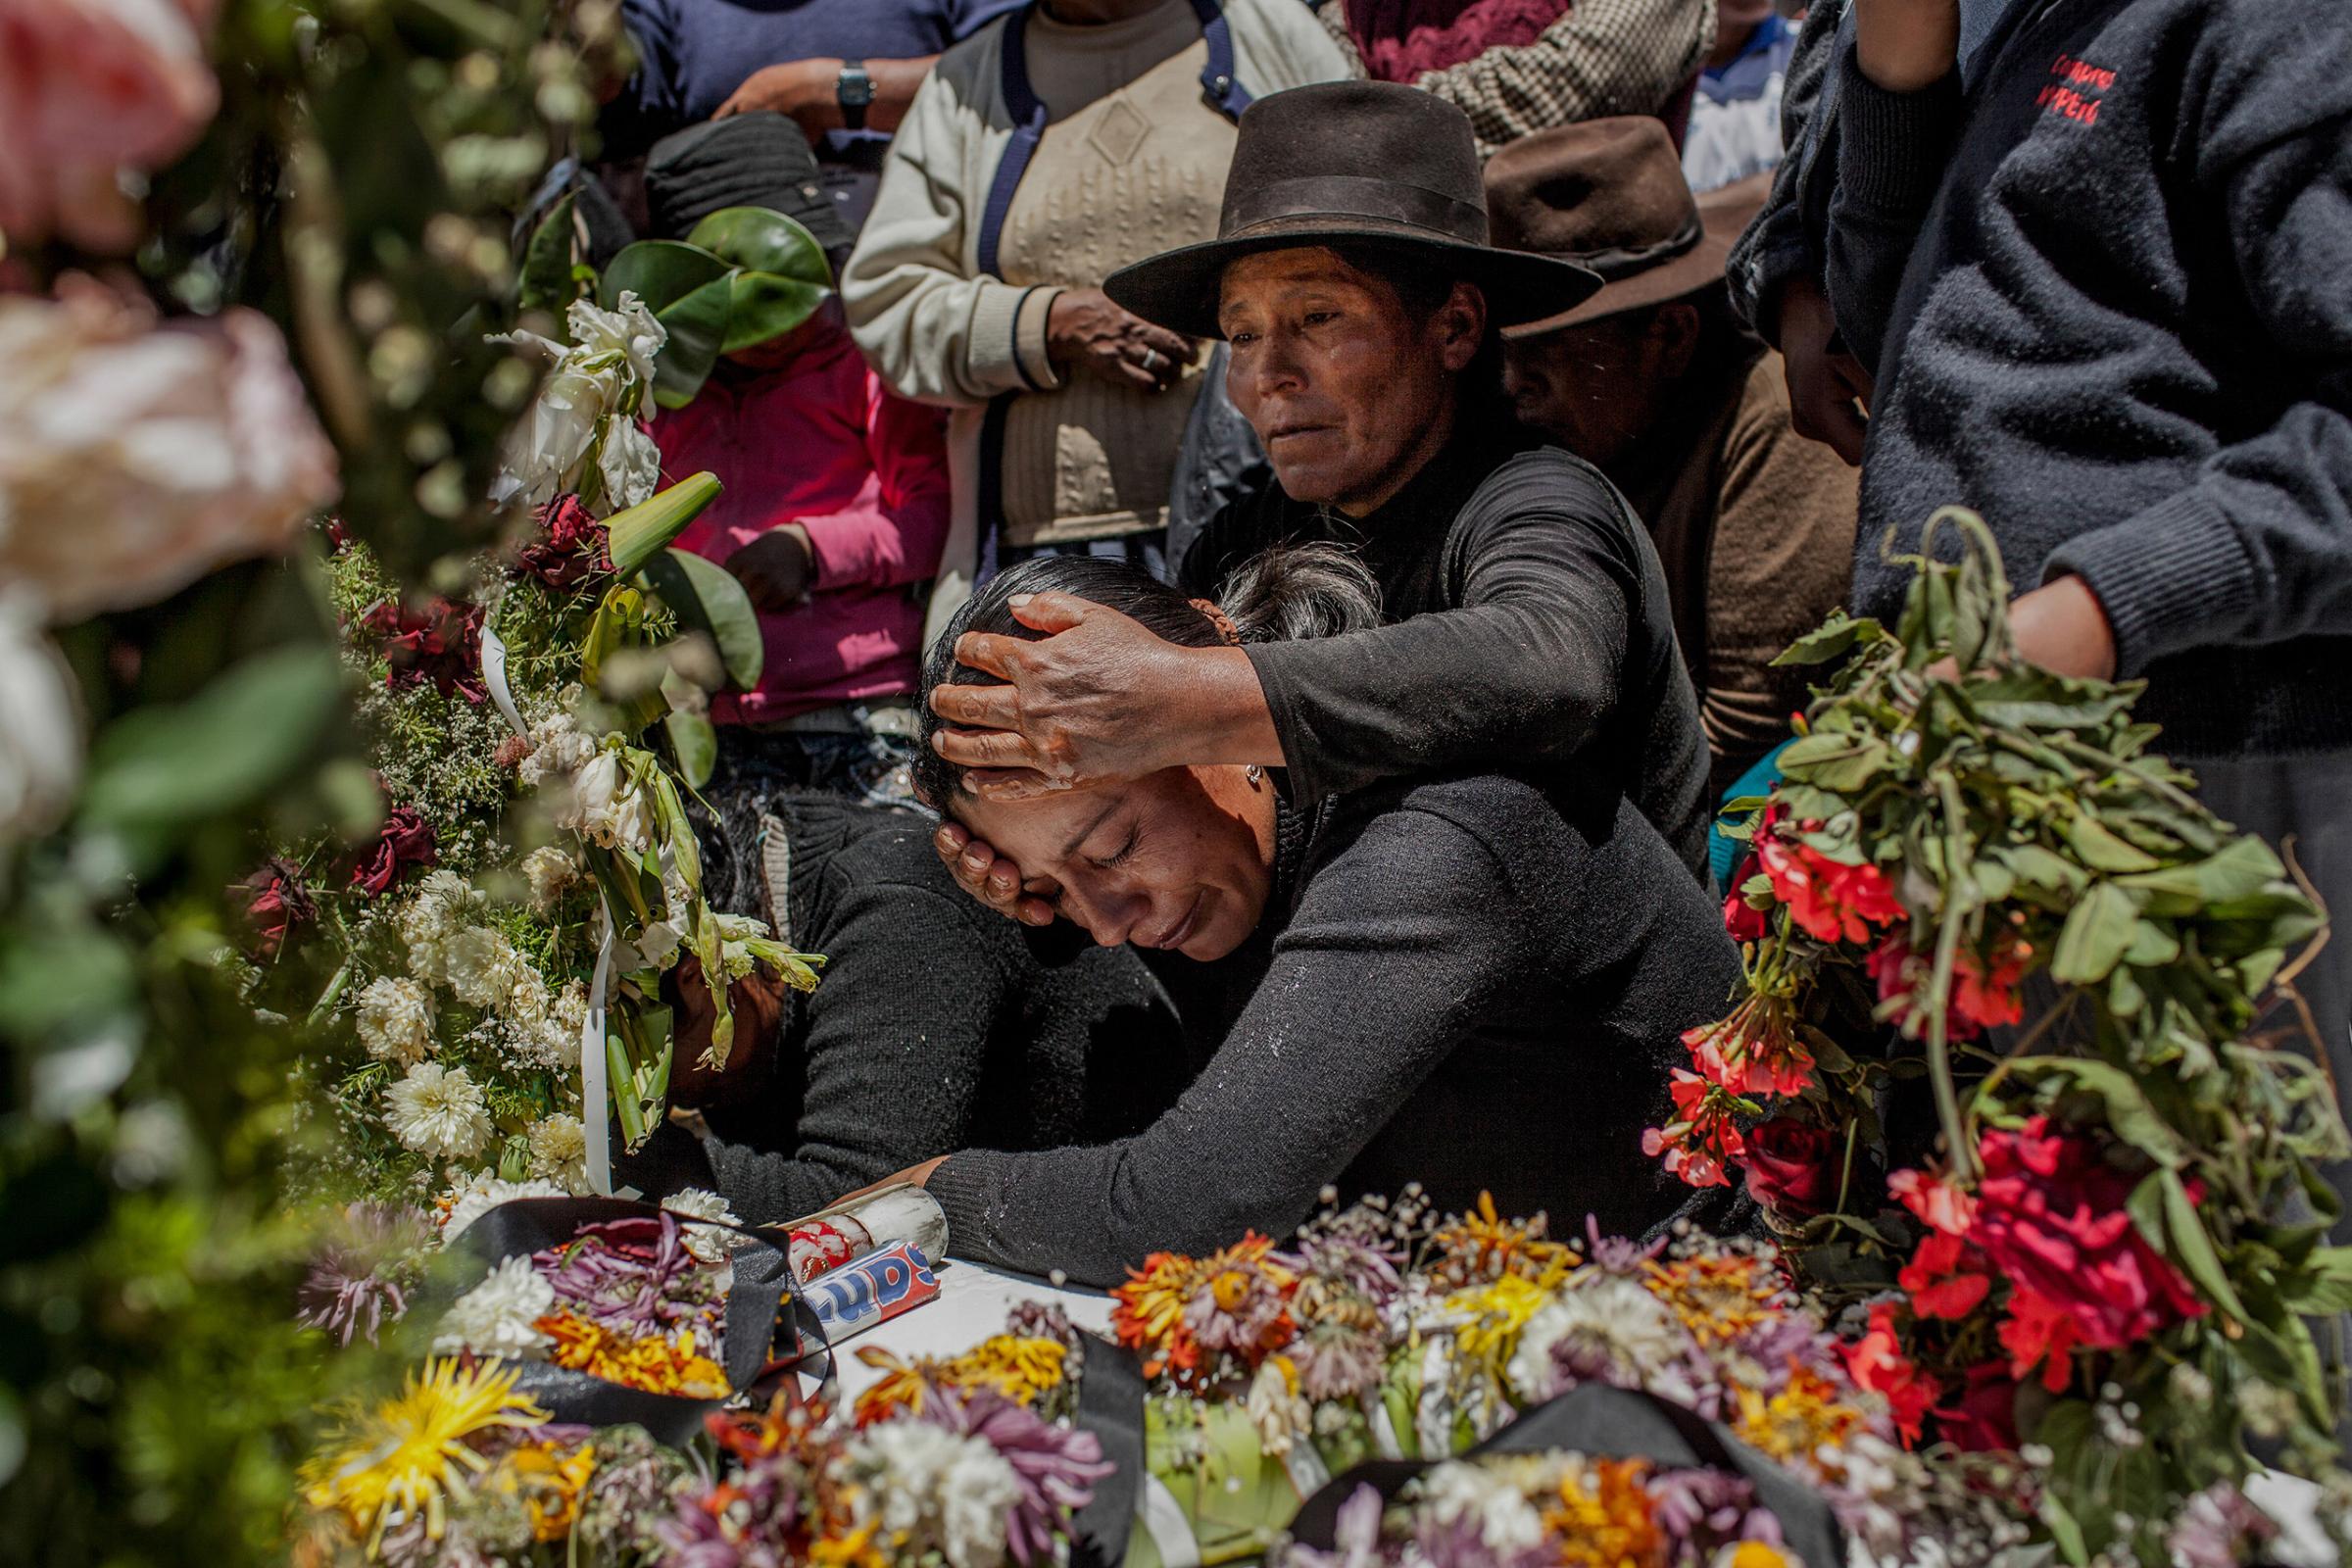 Twenty-five years after the massacre of Soras, the remains were exhumed to be identified and processed by the judicial system; after which they were delivered to their families. In Peru there are still 16,000 missing people related to terrorist violence during the 1980-2000.